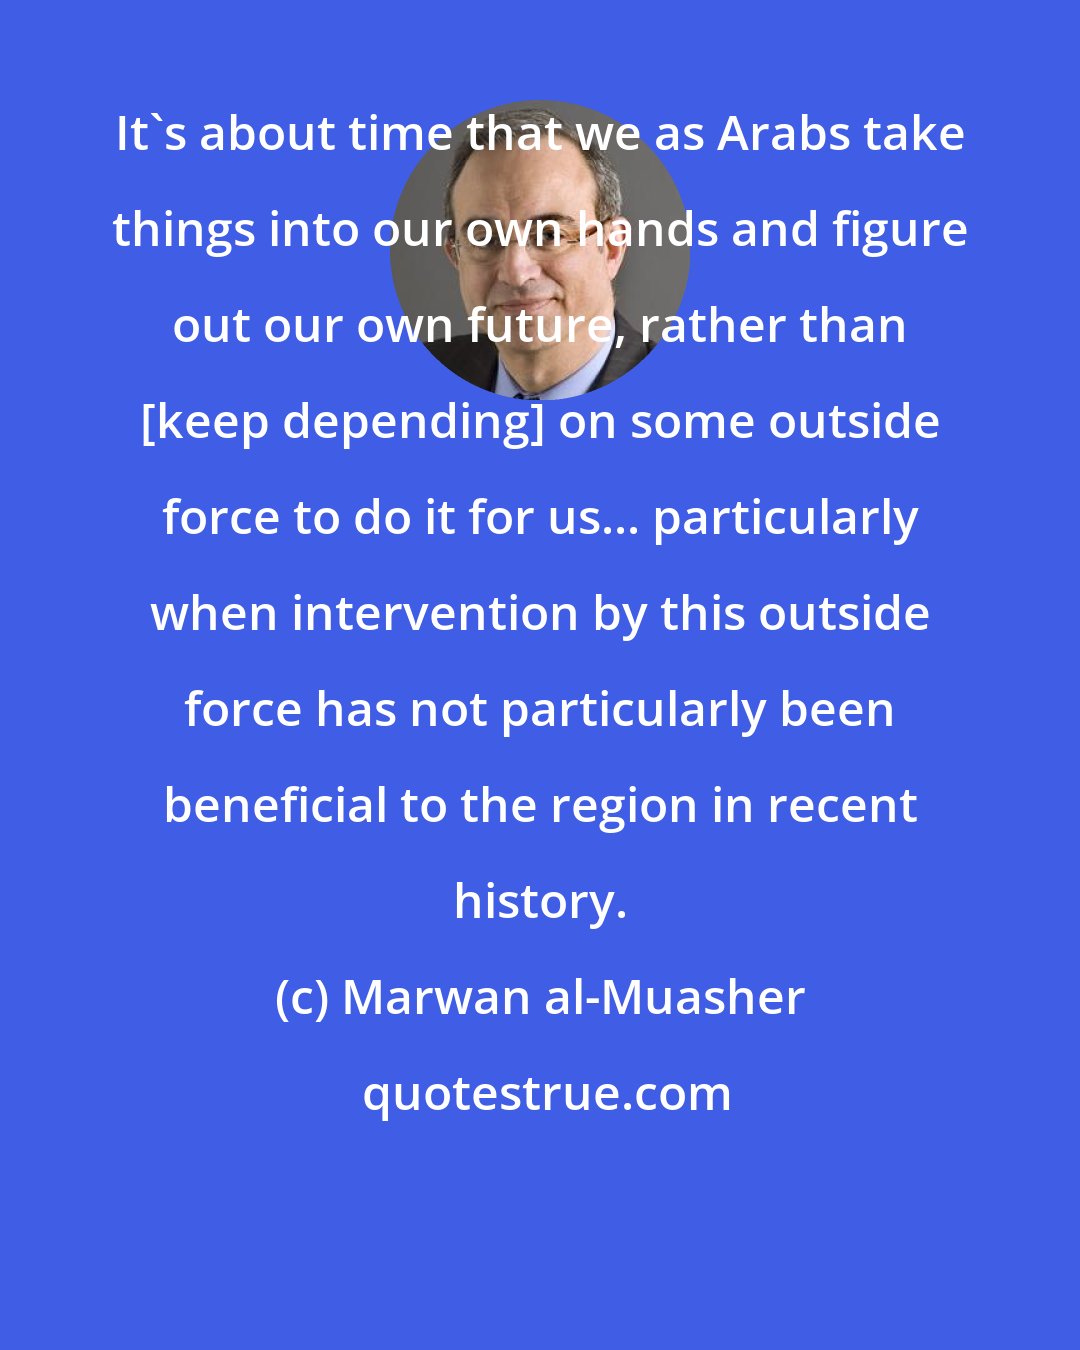 Marwan al-Muasher: It's about time that we as Arabs take things into our own hands and figure out our own future, rather than [keep depending] on some outside force to do it for us... particularly when intervention by this outside force has not particularly been beneficial to the region in recent history.